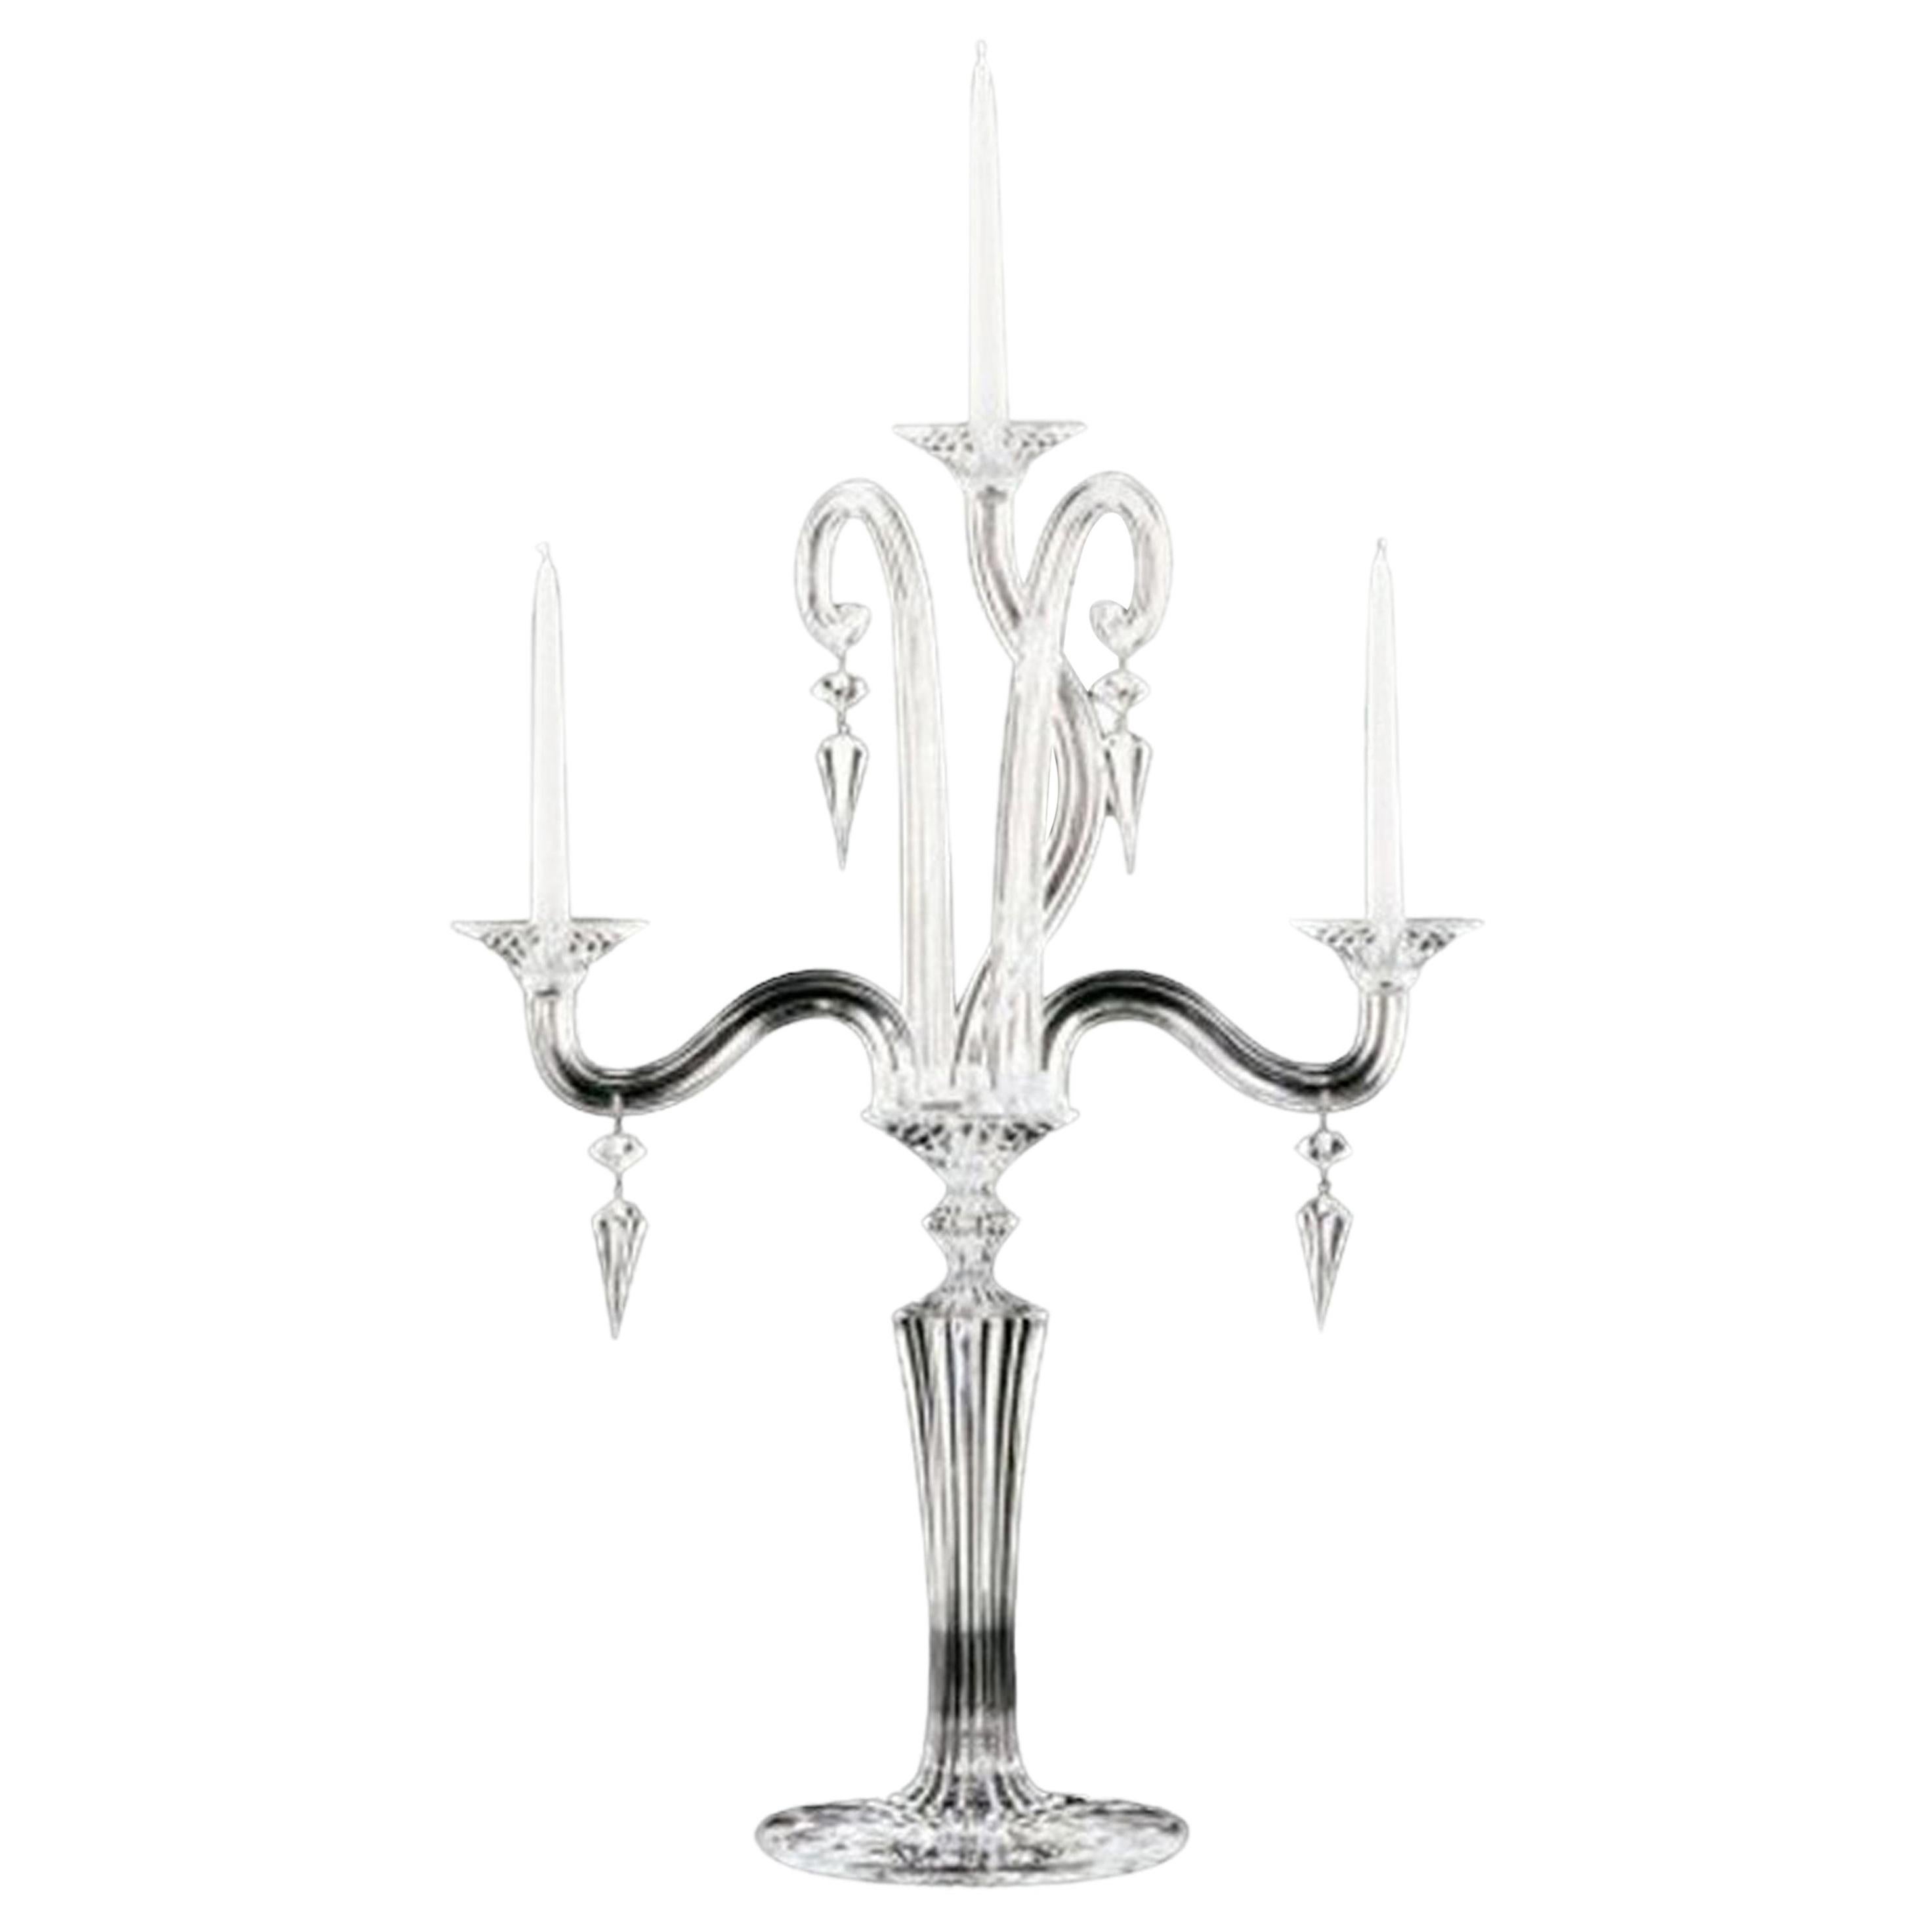 Baccarat Clear Crystal Mill Nuits French Mathias Design Candelabra For Sale